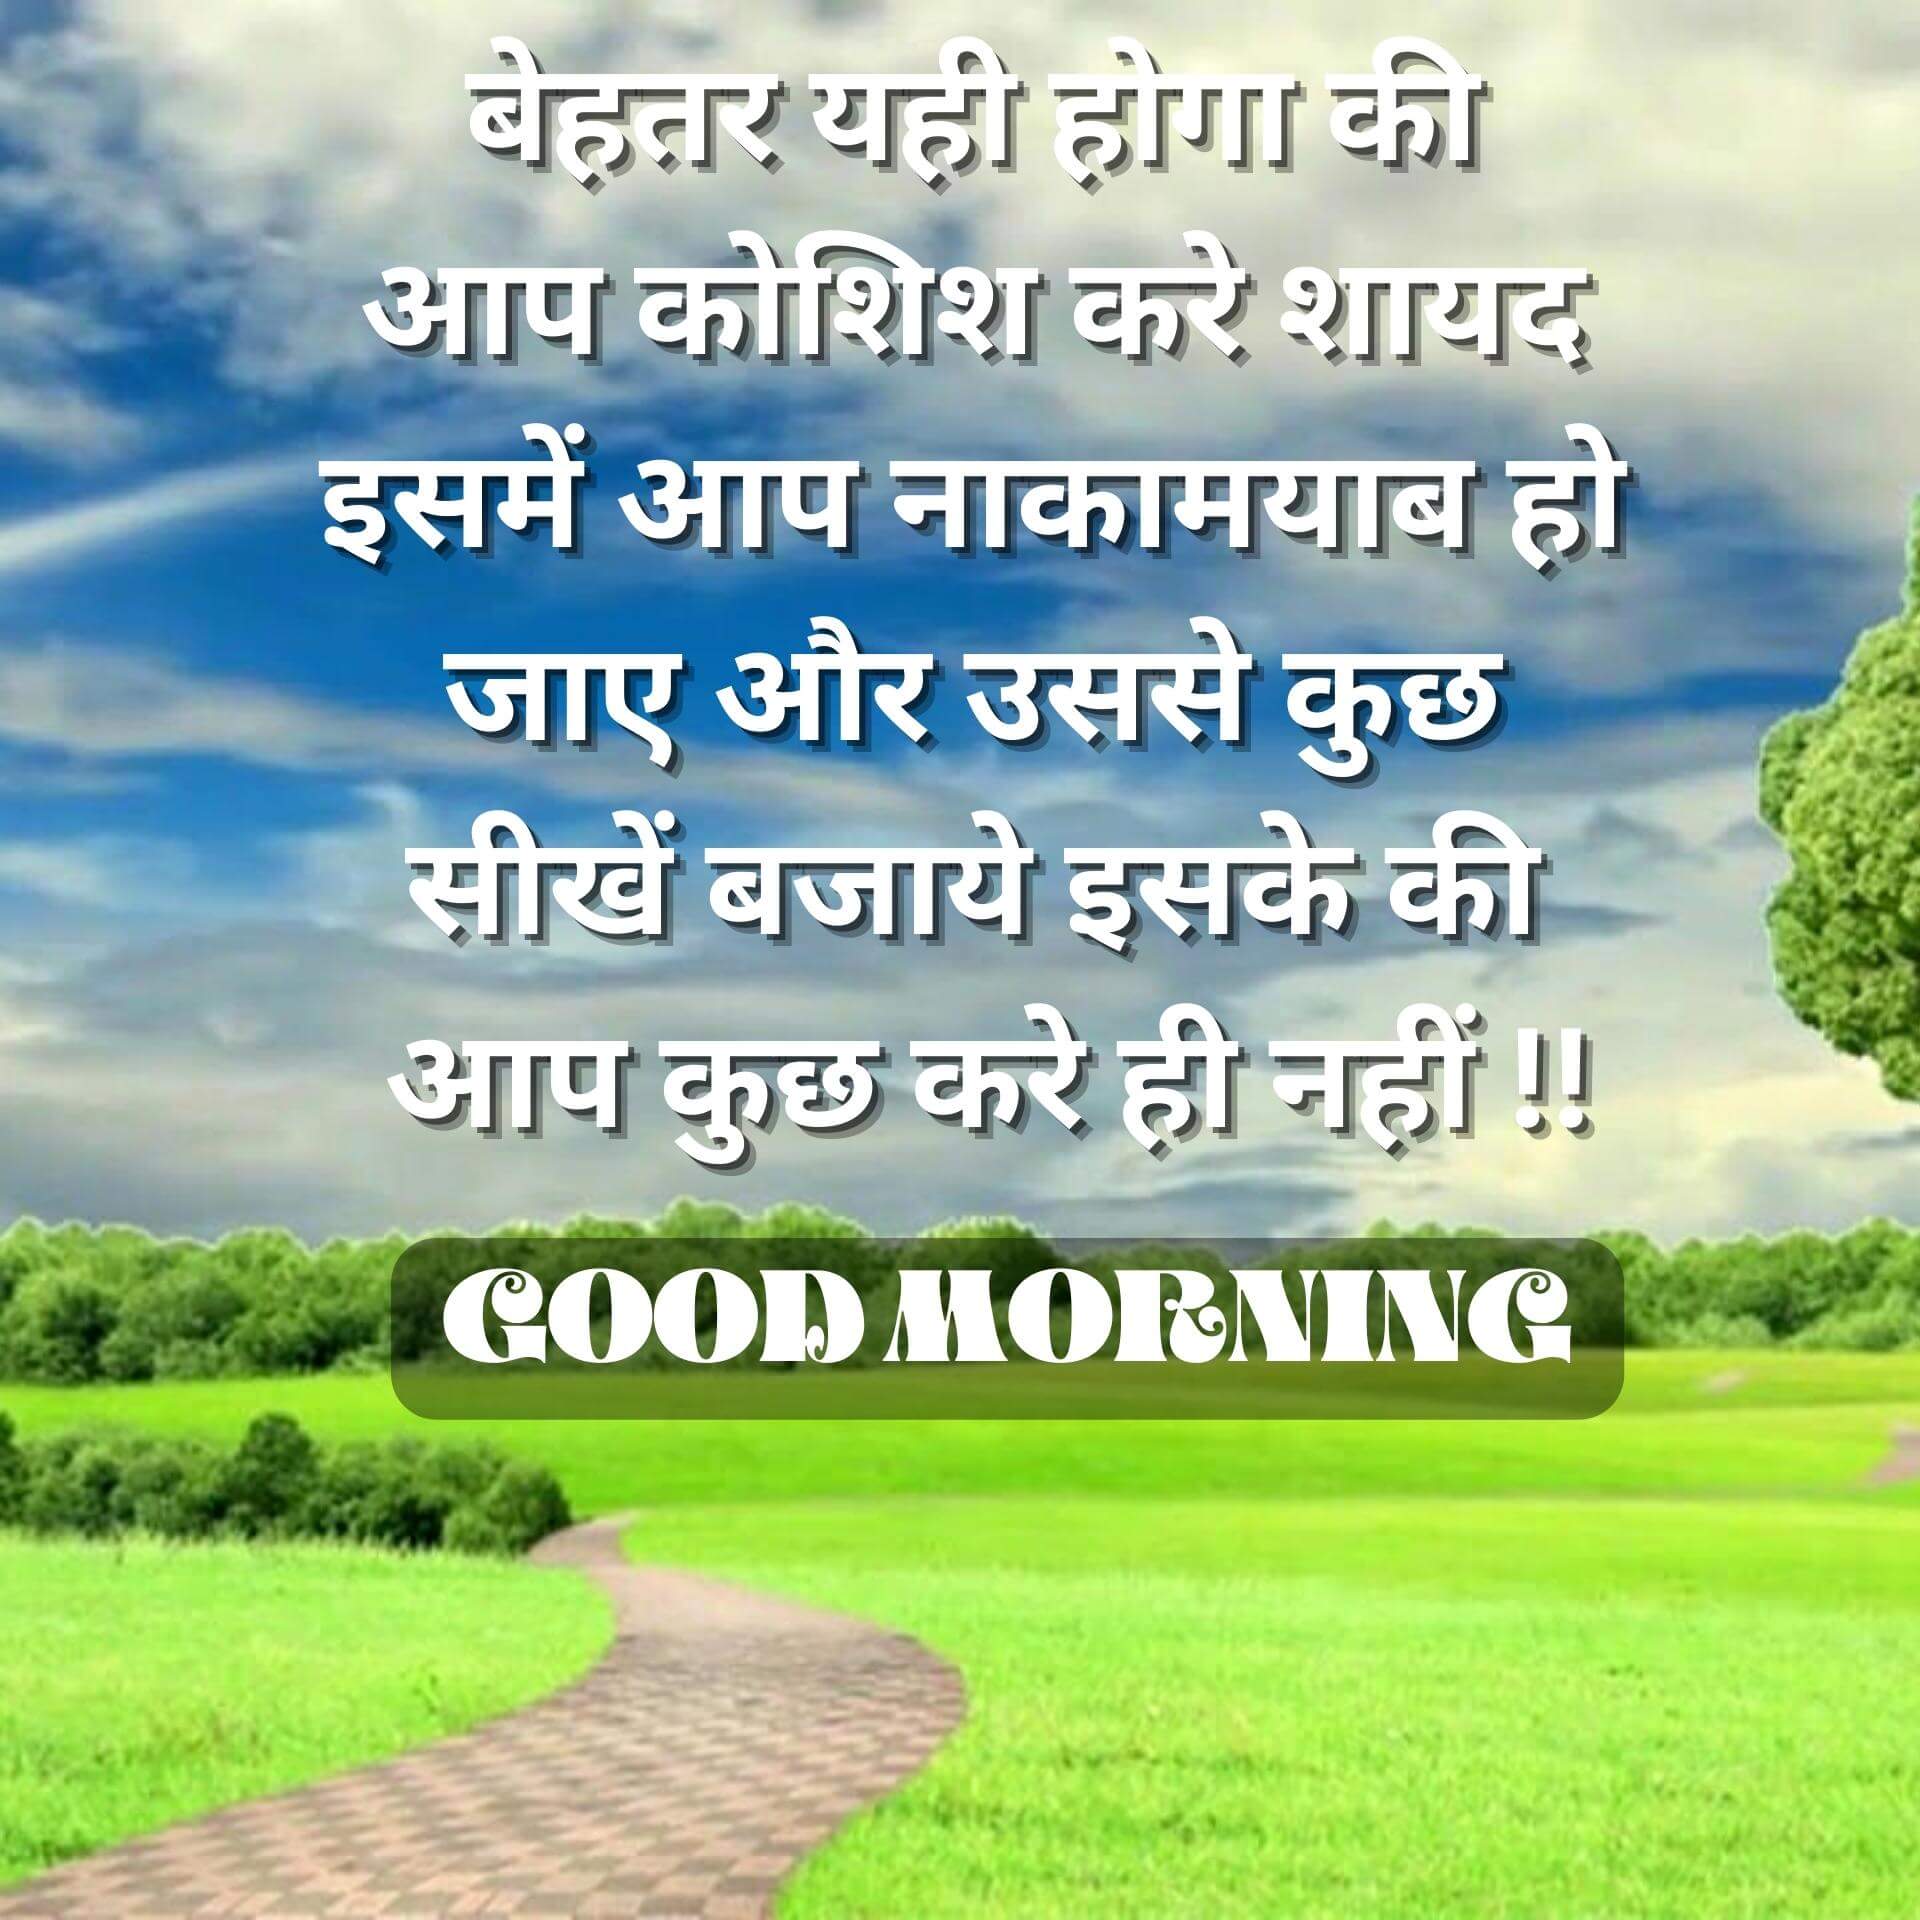 Good Morning Images With Hindi Quotes Pics Free Download